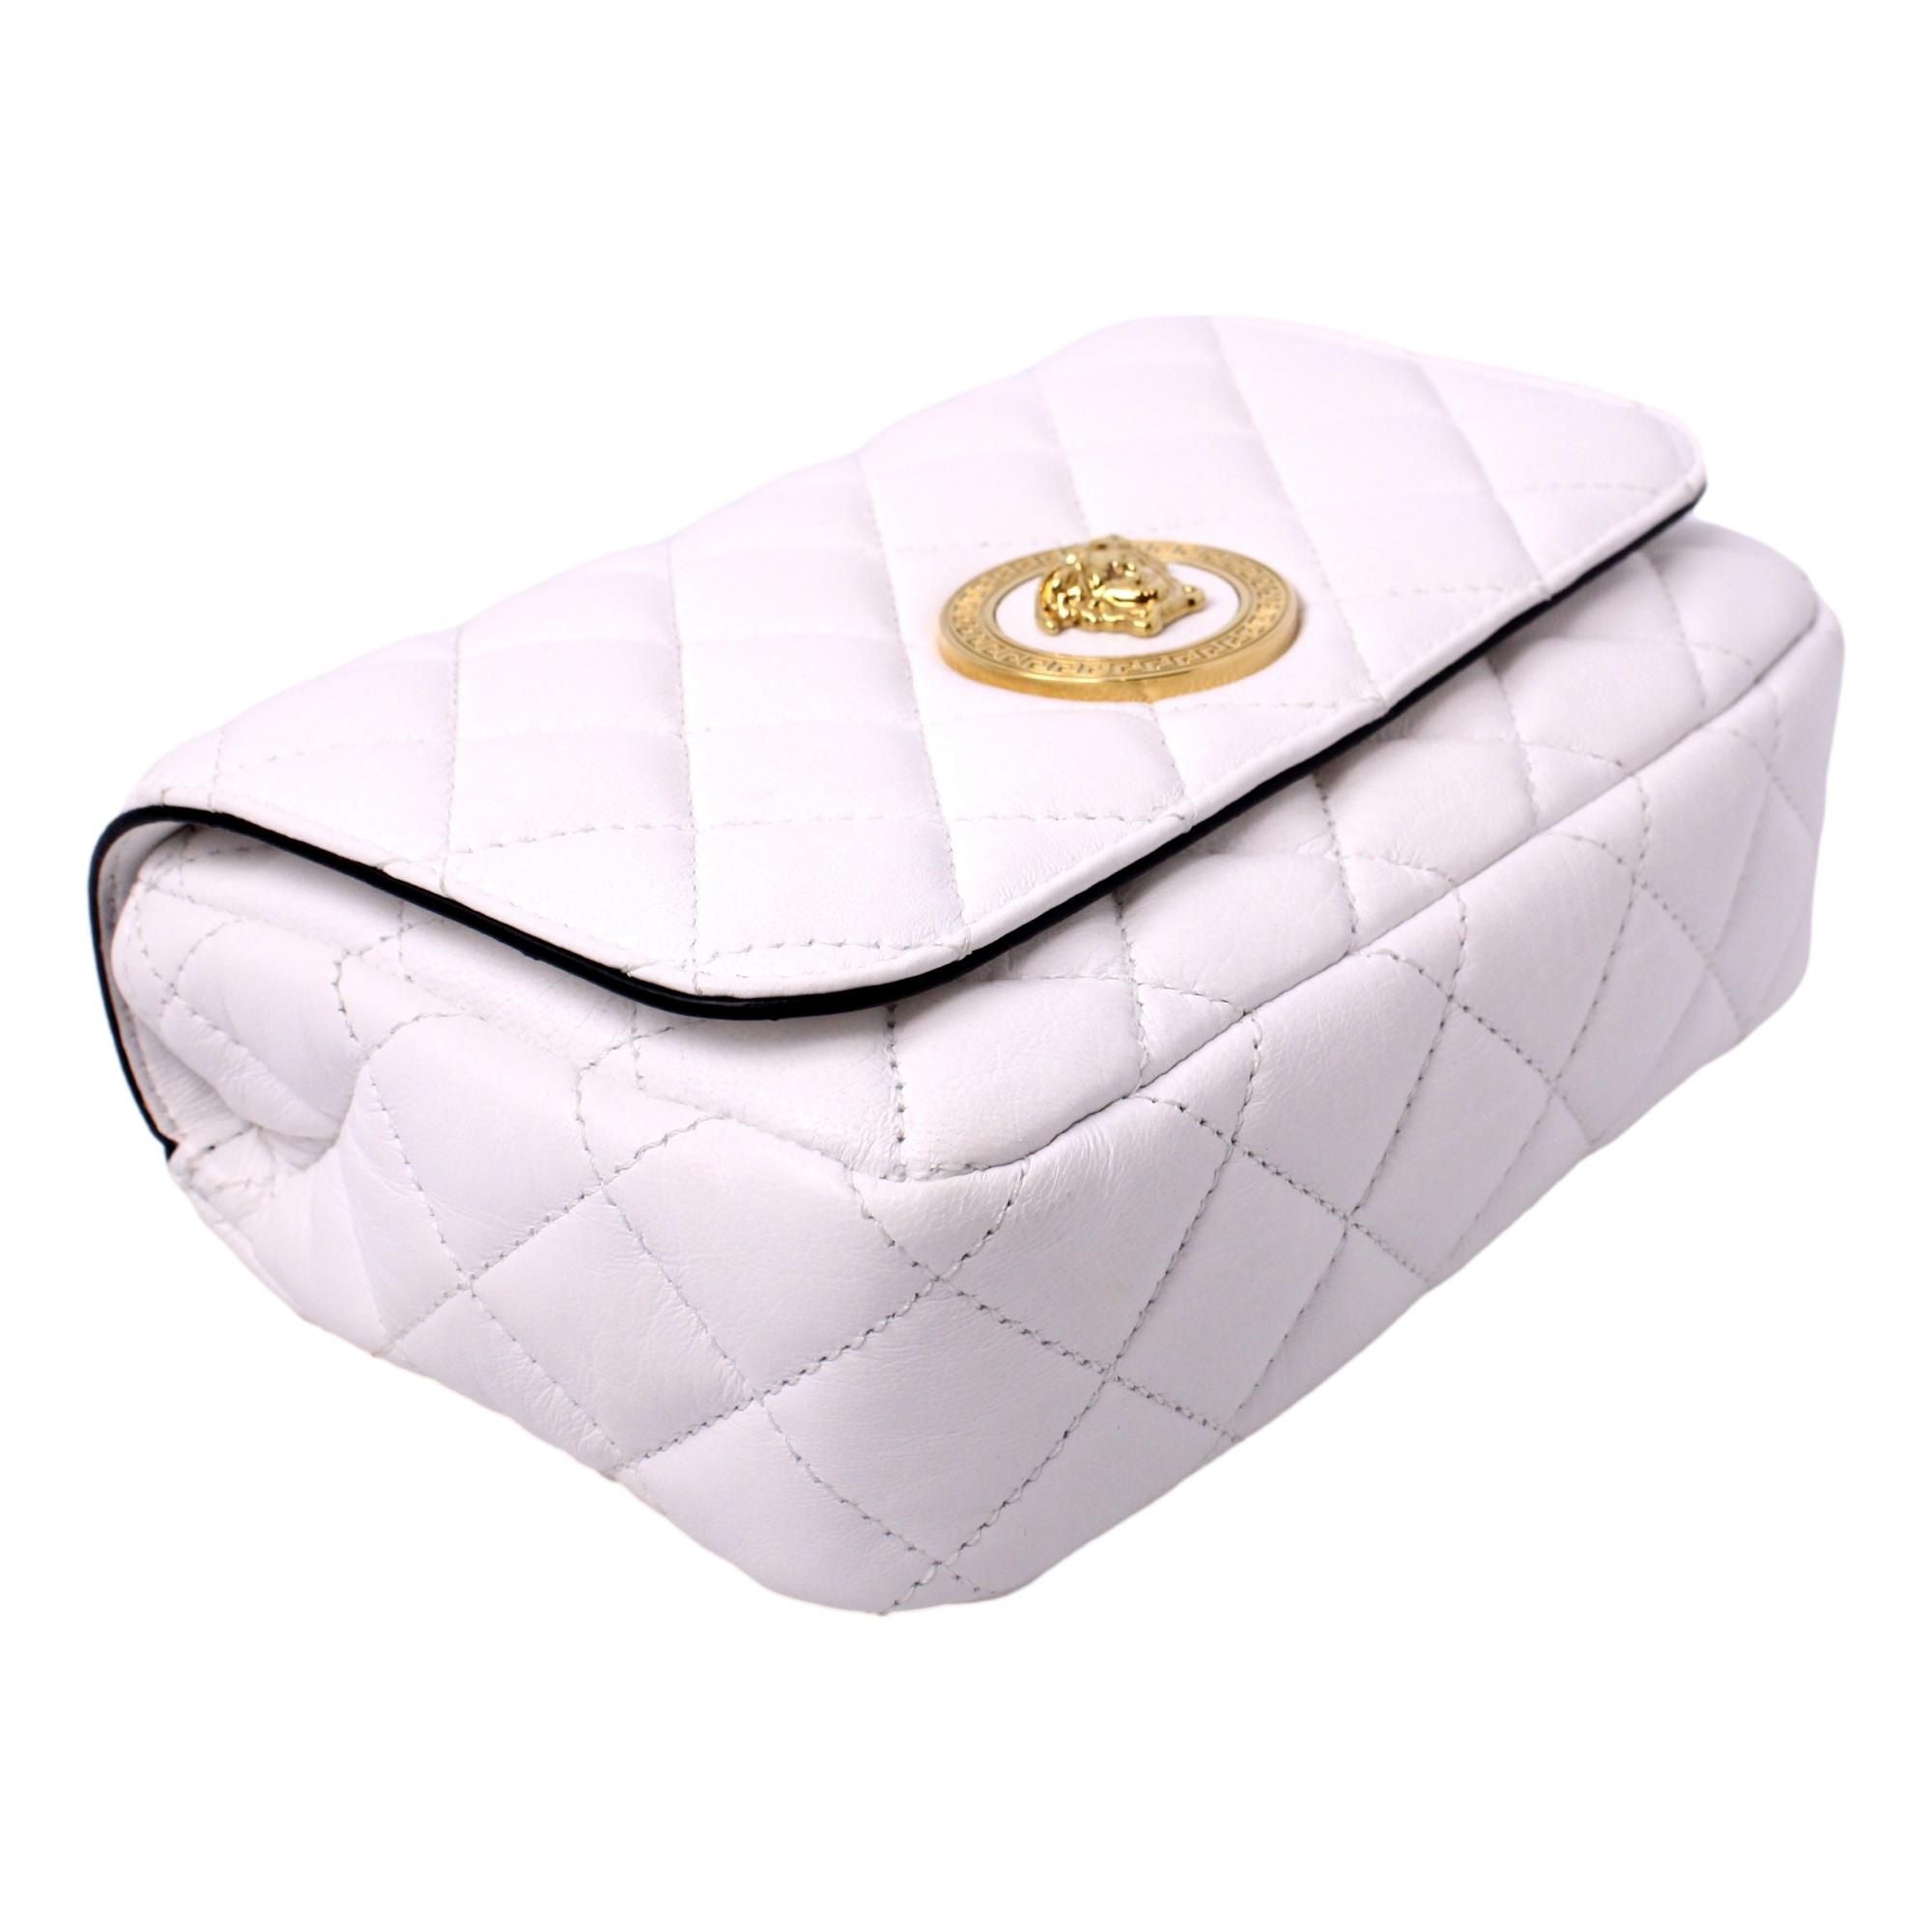 Versace La Medusa Quilted White Lambskin Leather Crossbody Shoulder Bag at_Queen_Bee_of_Beverly_Hills